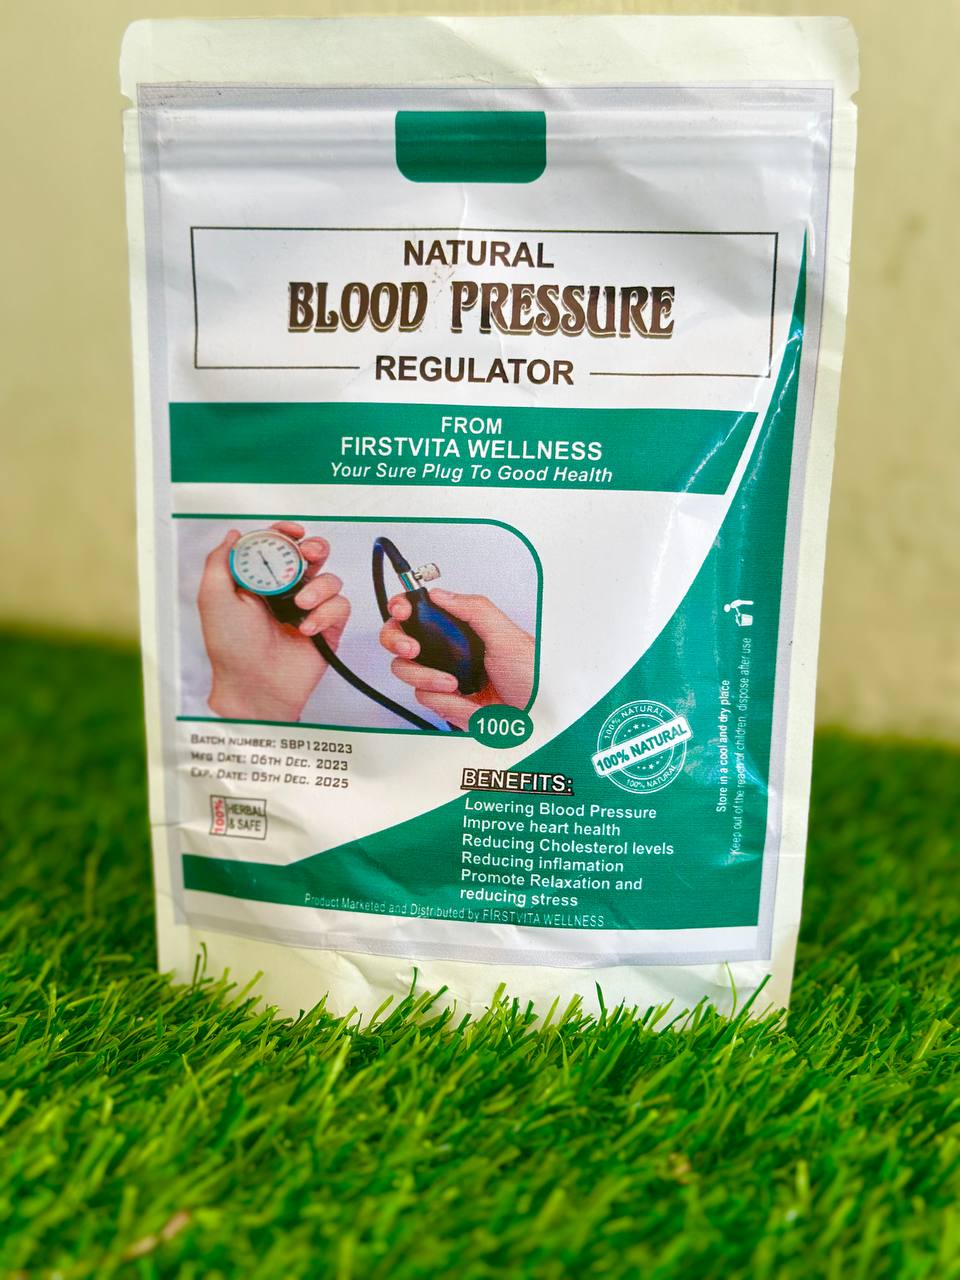 1 product grass